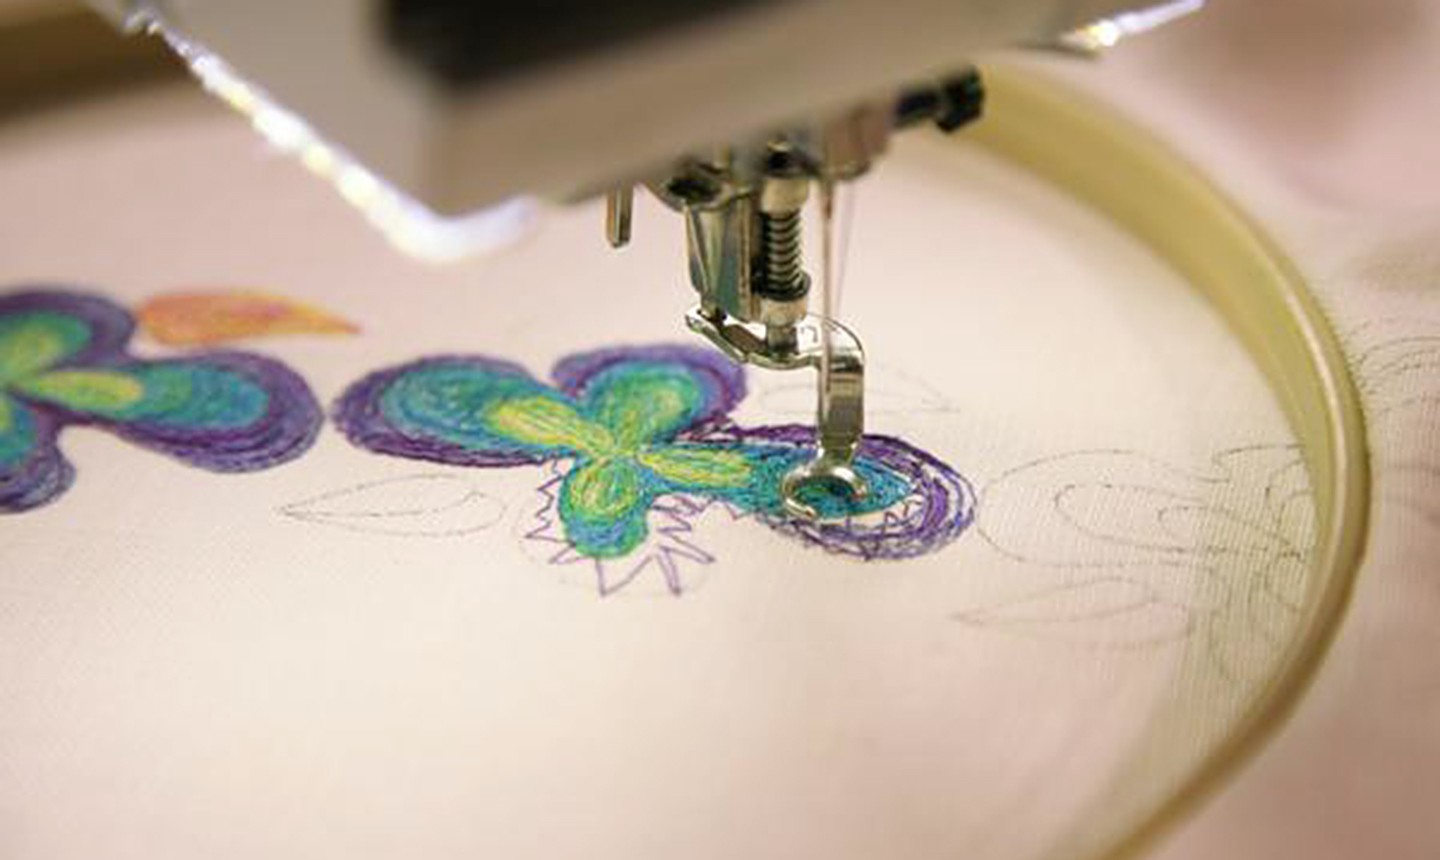 Sewing Machine Embroidery Patterns How To Free Motion Machine Embroider